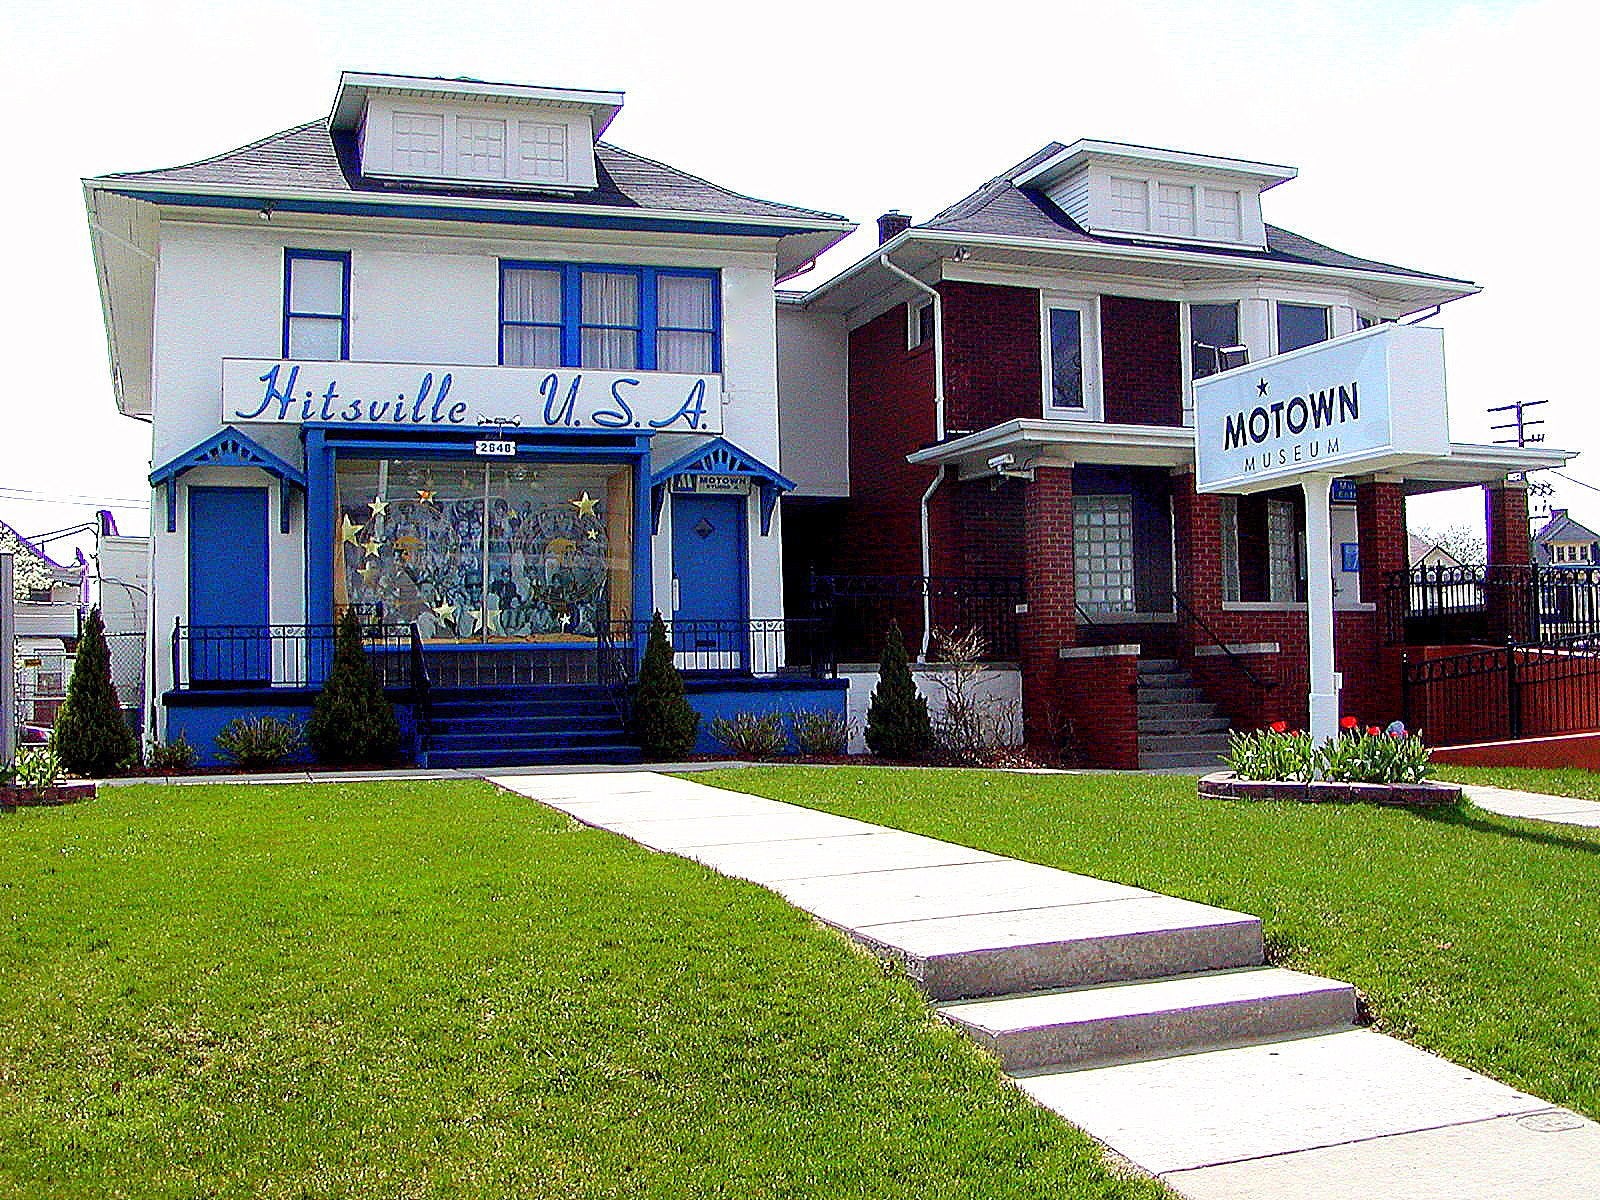 Detroit's Motown Museum Is Getting A Major Upgrade
